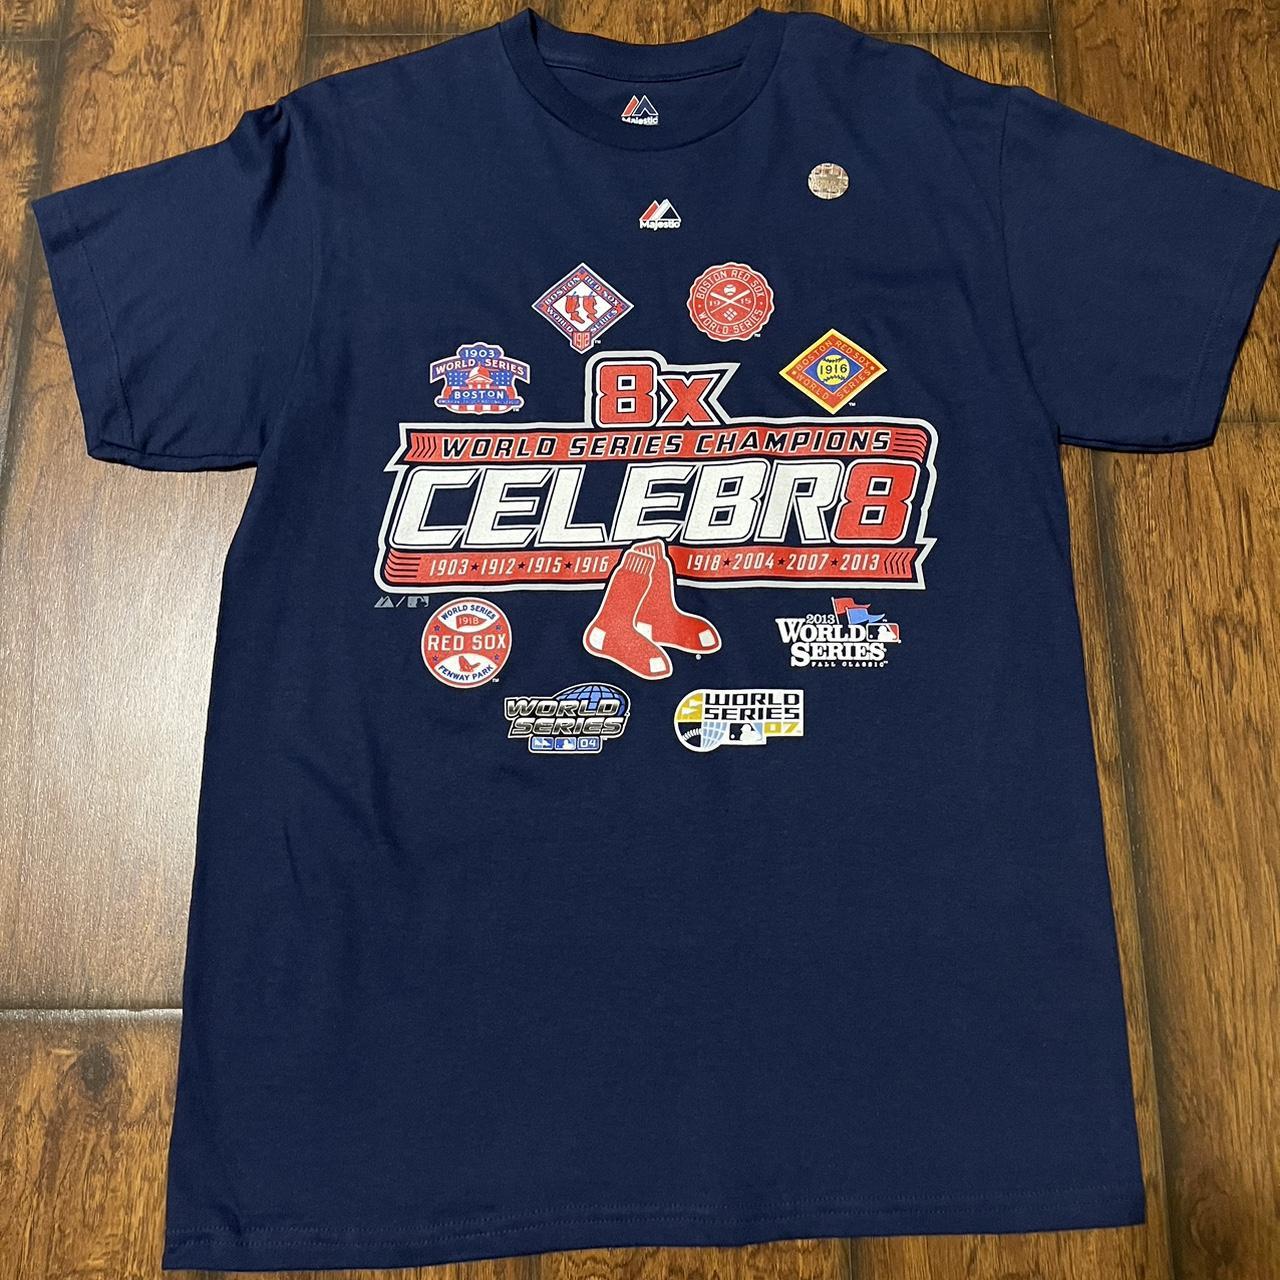 Red Sox celebrate 8 times World Series champions... - Depop